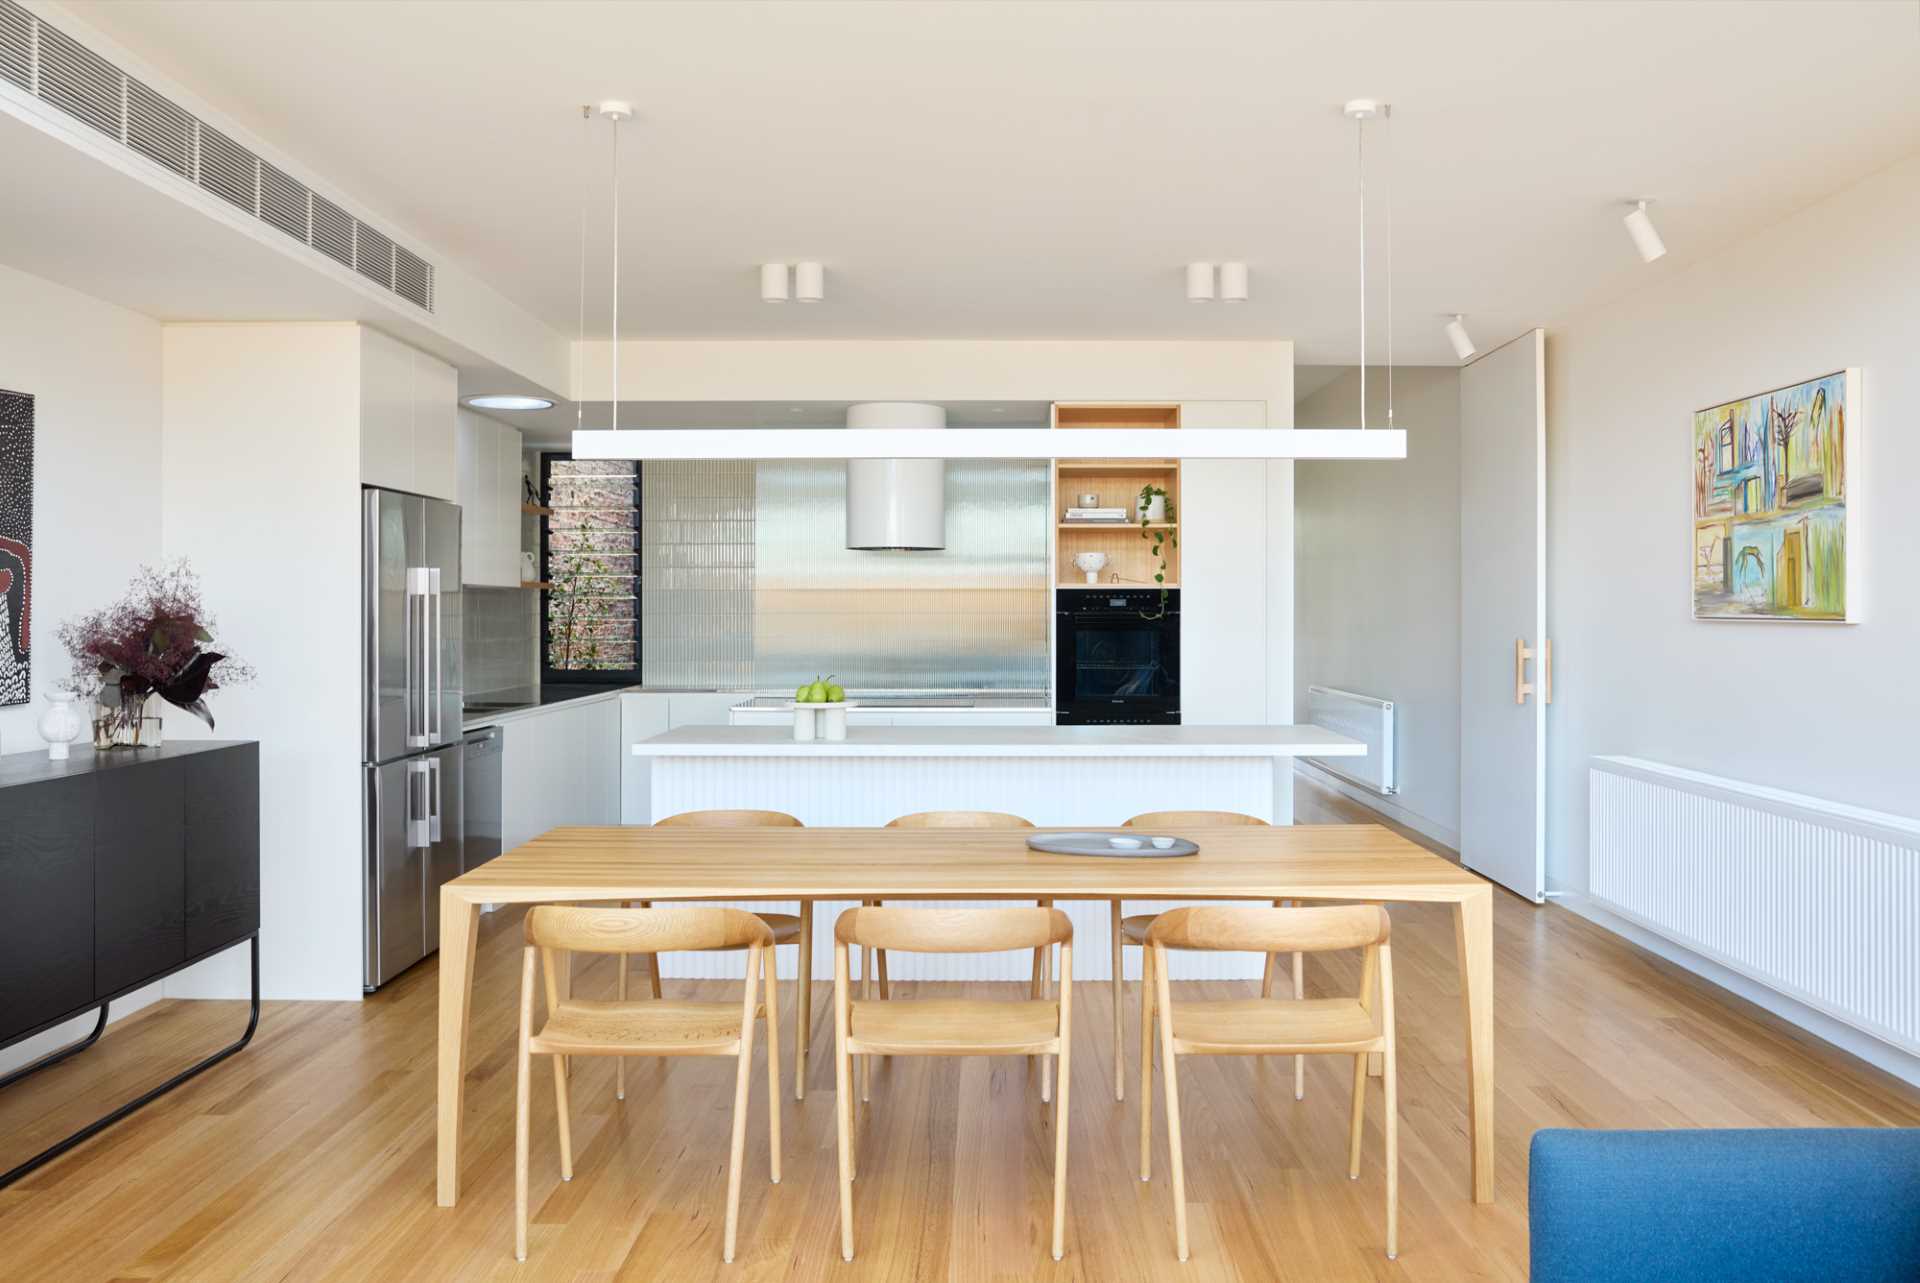 A modern interior with a dining area separating the living room and kitchen.